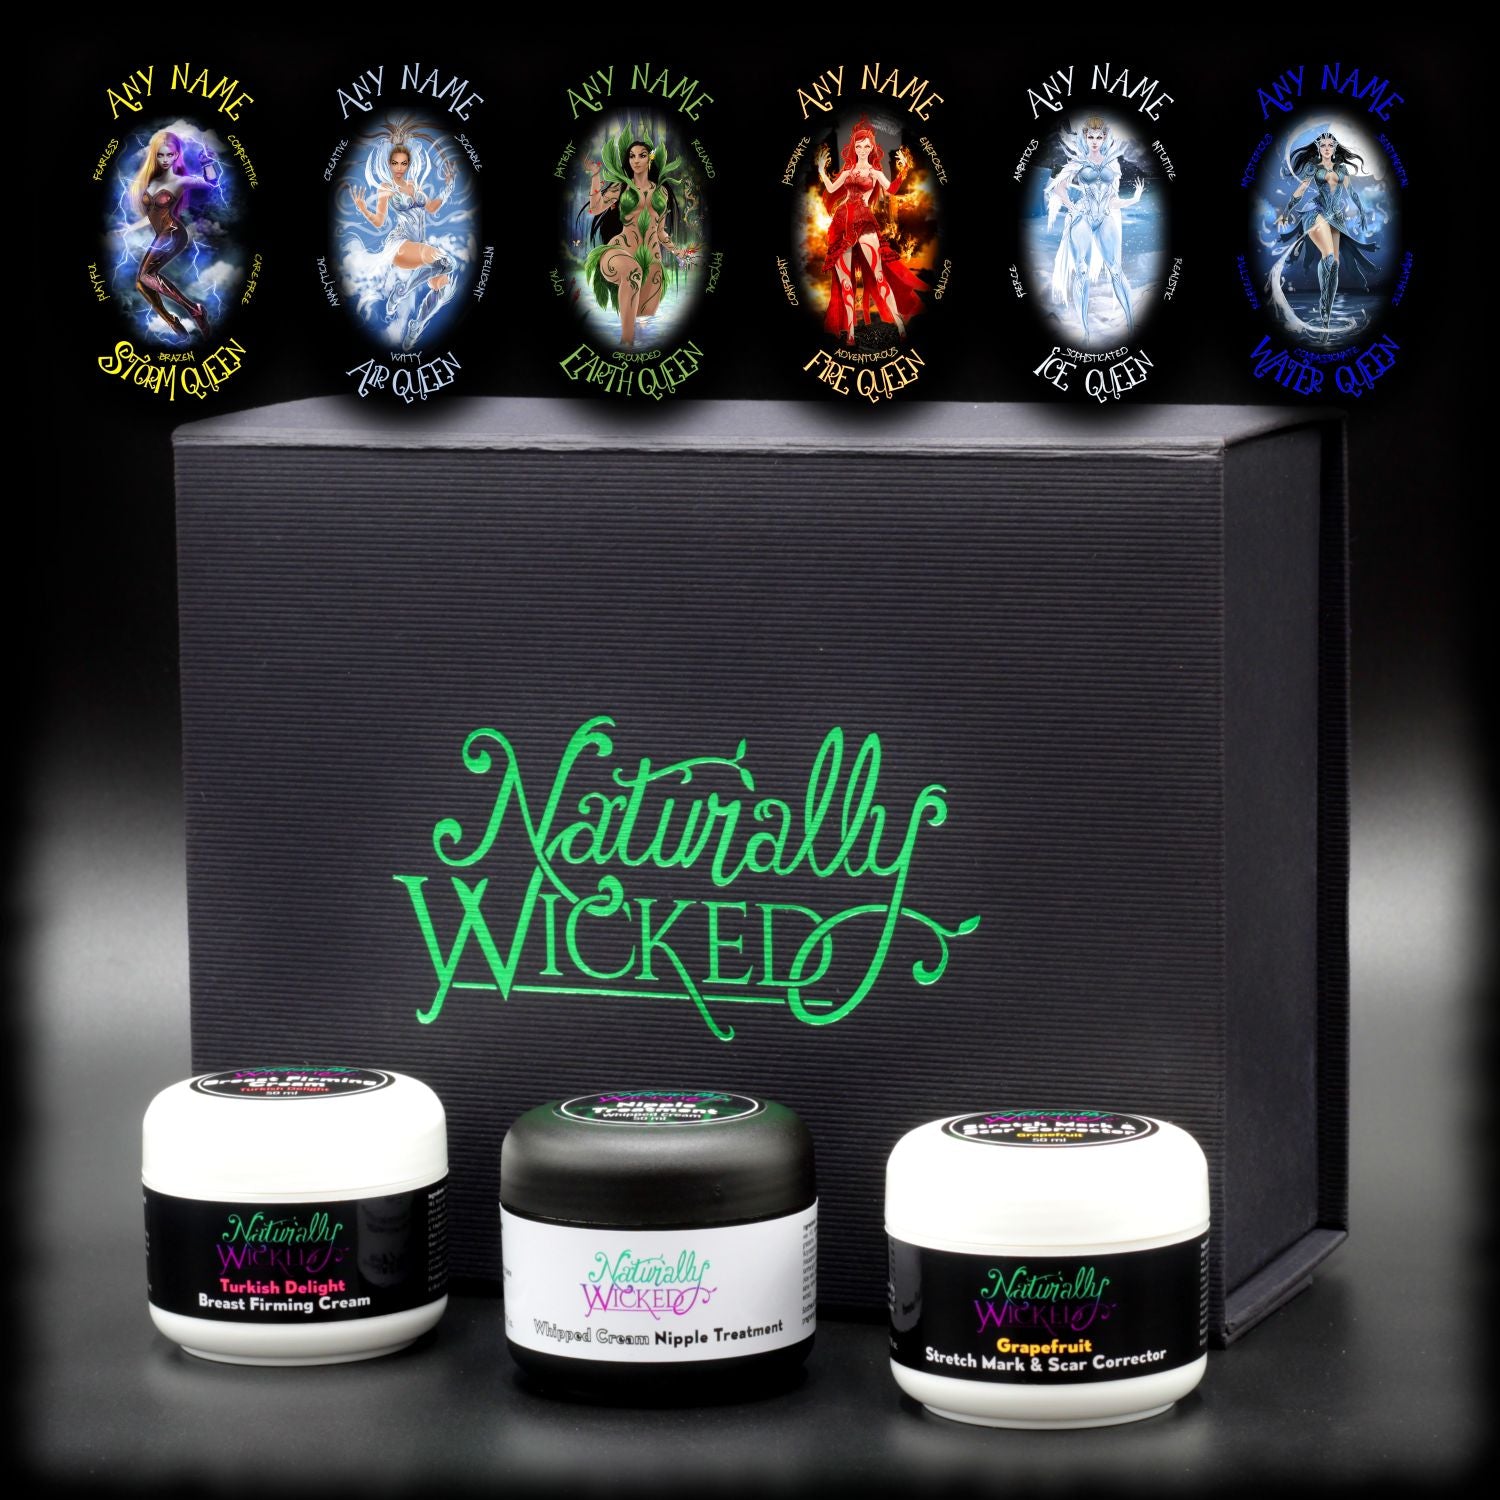 Naturally Wicked Personalised Mamma Kit With Breast Firming Cream, Nipple Treatment & Stretch Mark Corrector Beside Classy Black Wicked Queen Gift Box - Makes Perfect Gift For New Mum